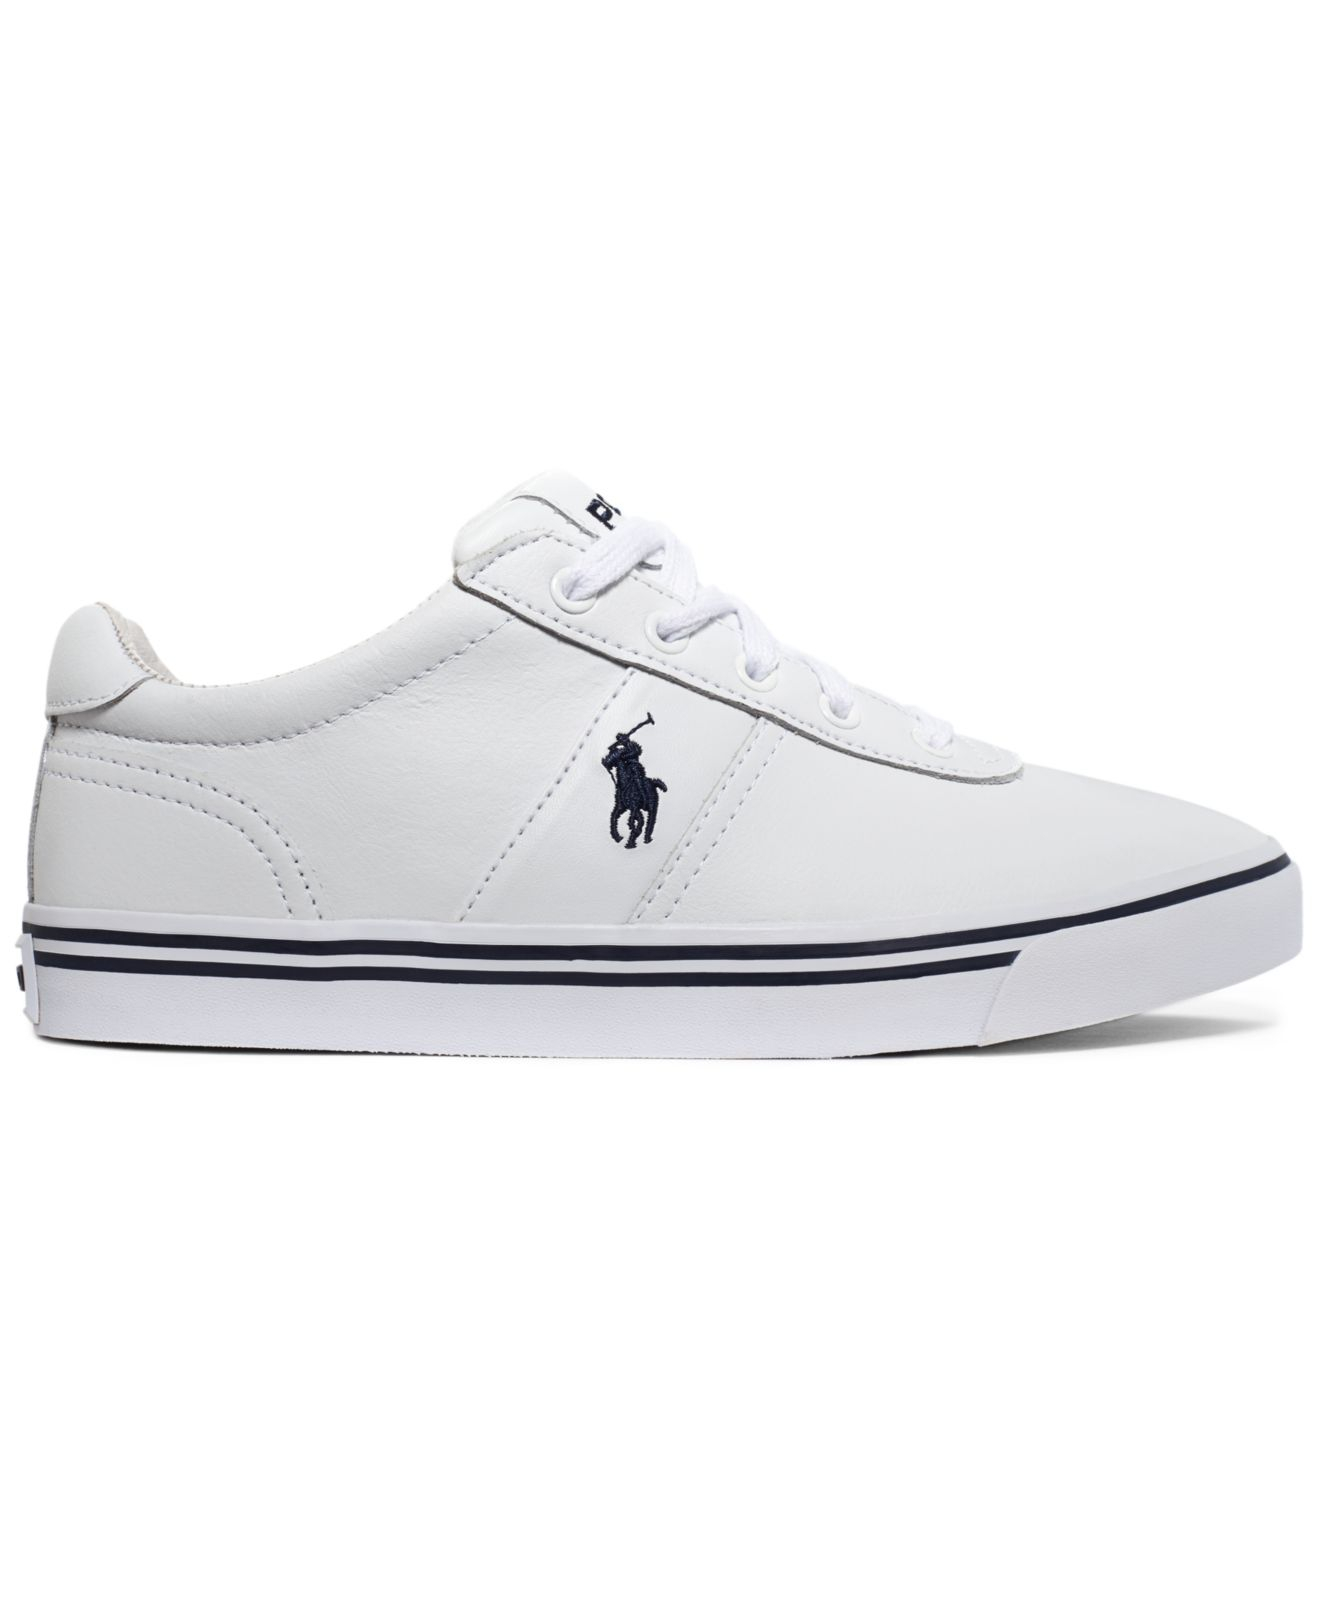 Lyst - Polo Ralph Lauren Hanford Leather Sneakers in White for Men